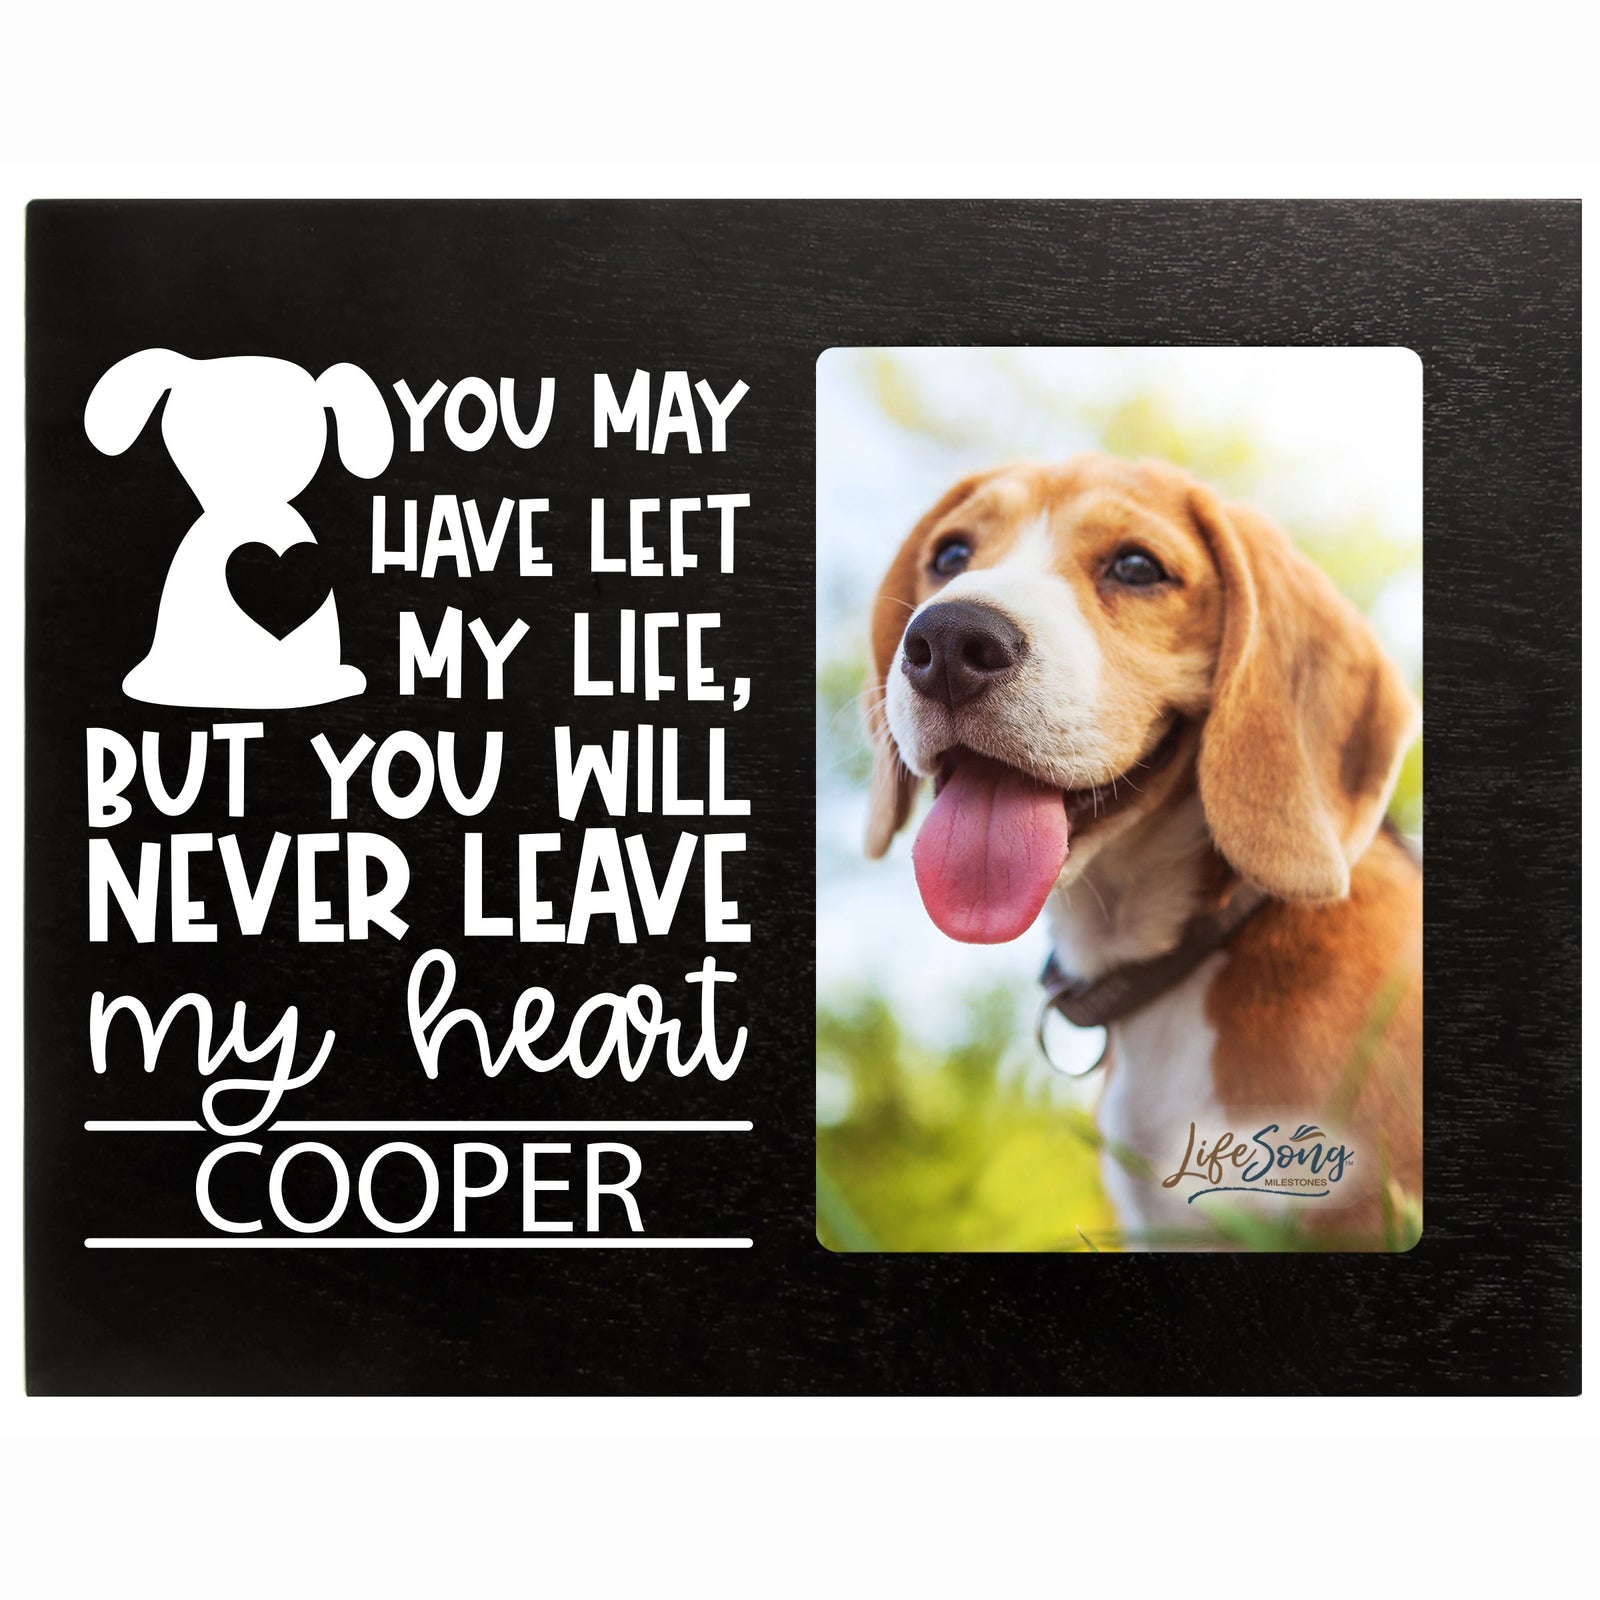 8x10 Black Pet Memorial Picture Frame with the phrase "You May Have Left My Life, But You Will Never Leave My Heart"